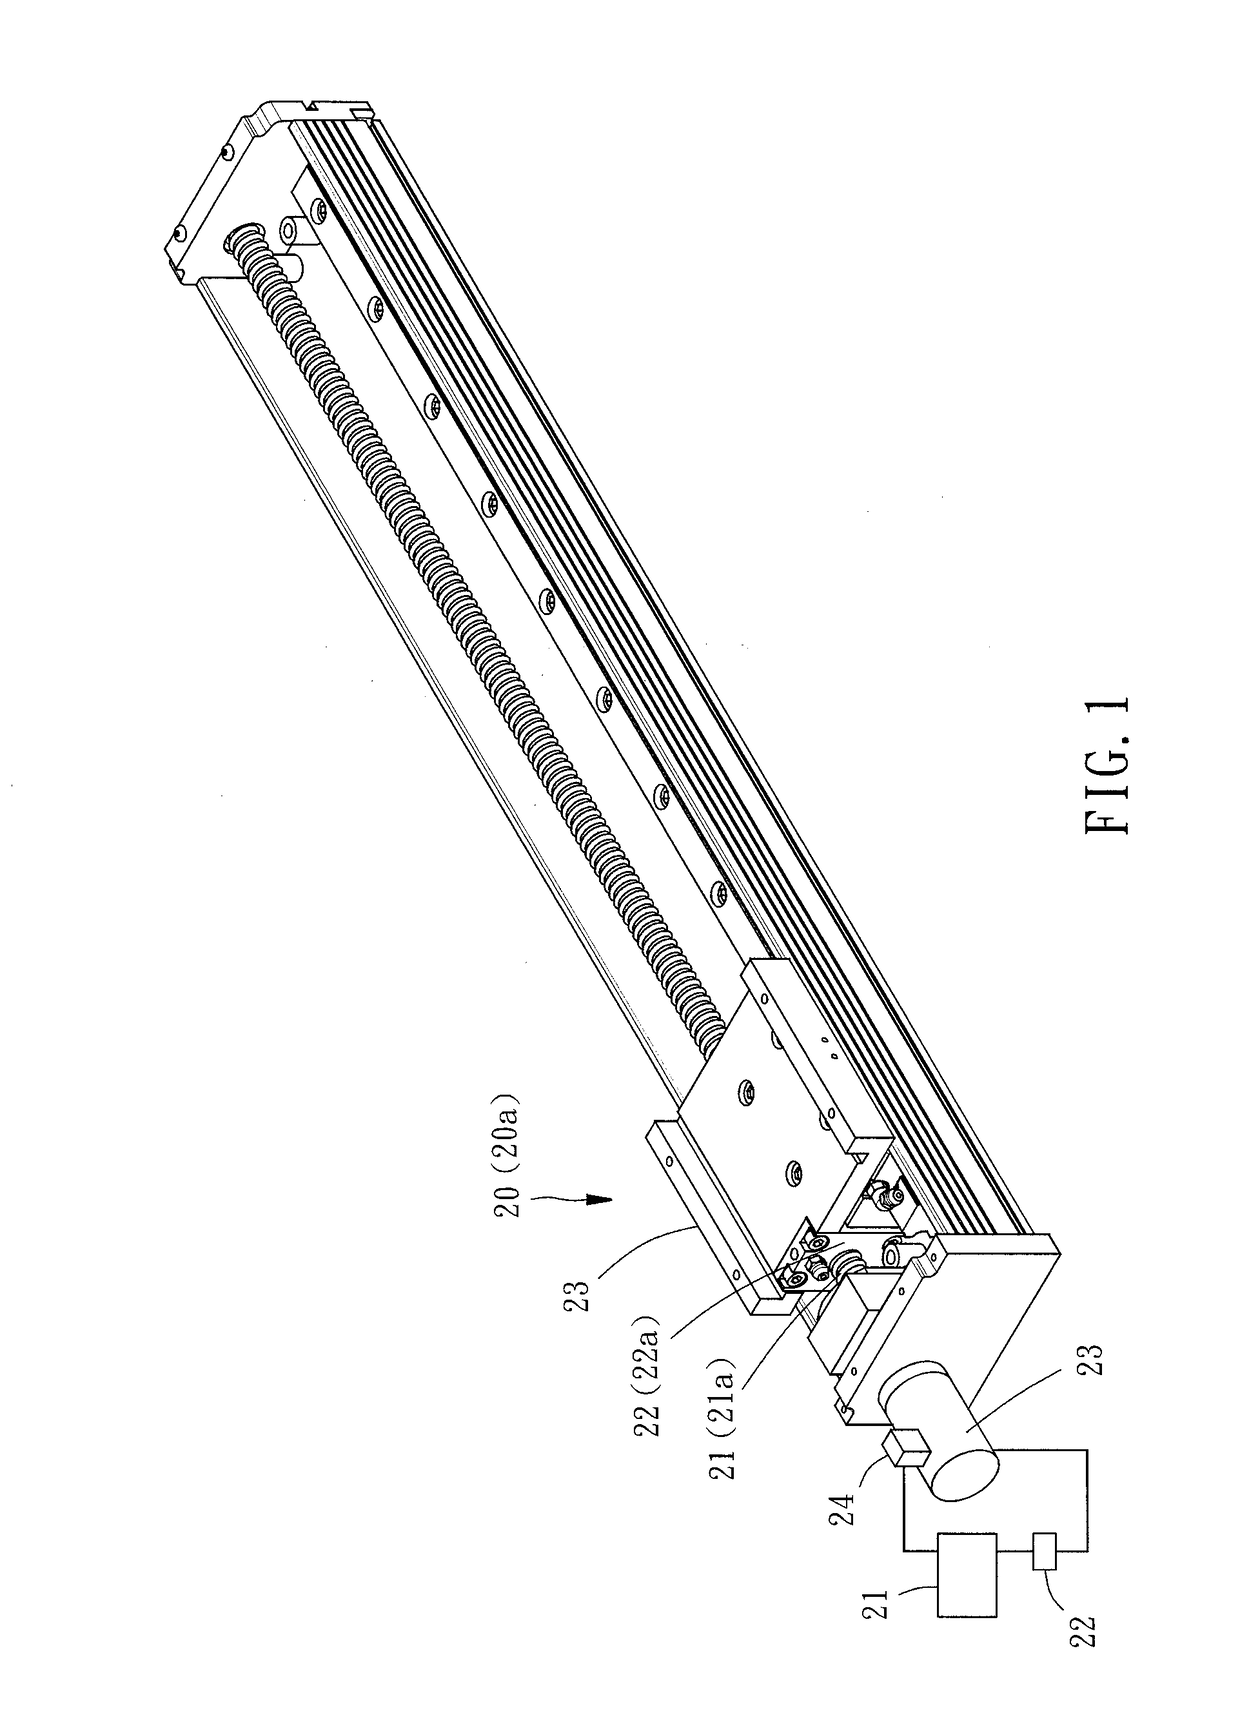 Method for identifying friction parameter for linear module